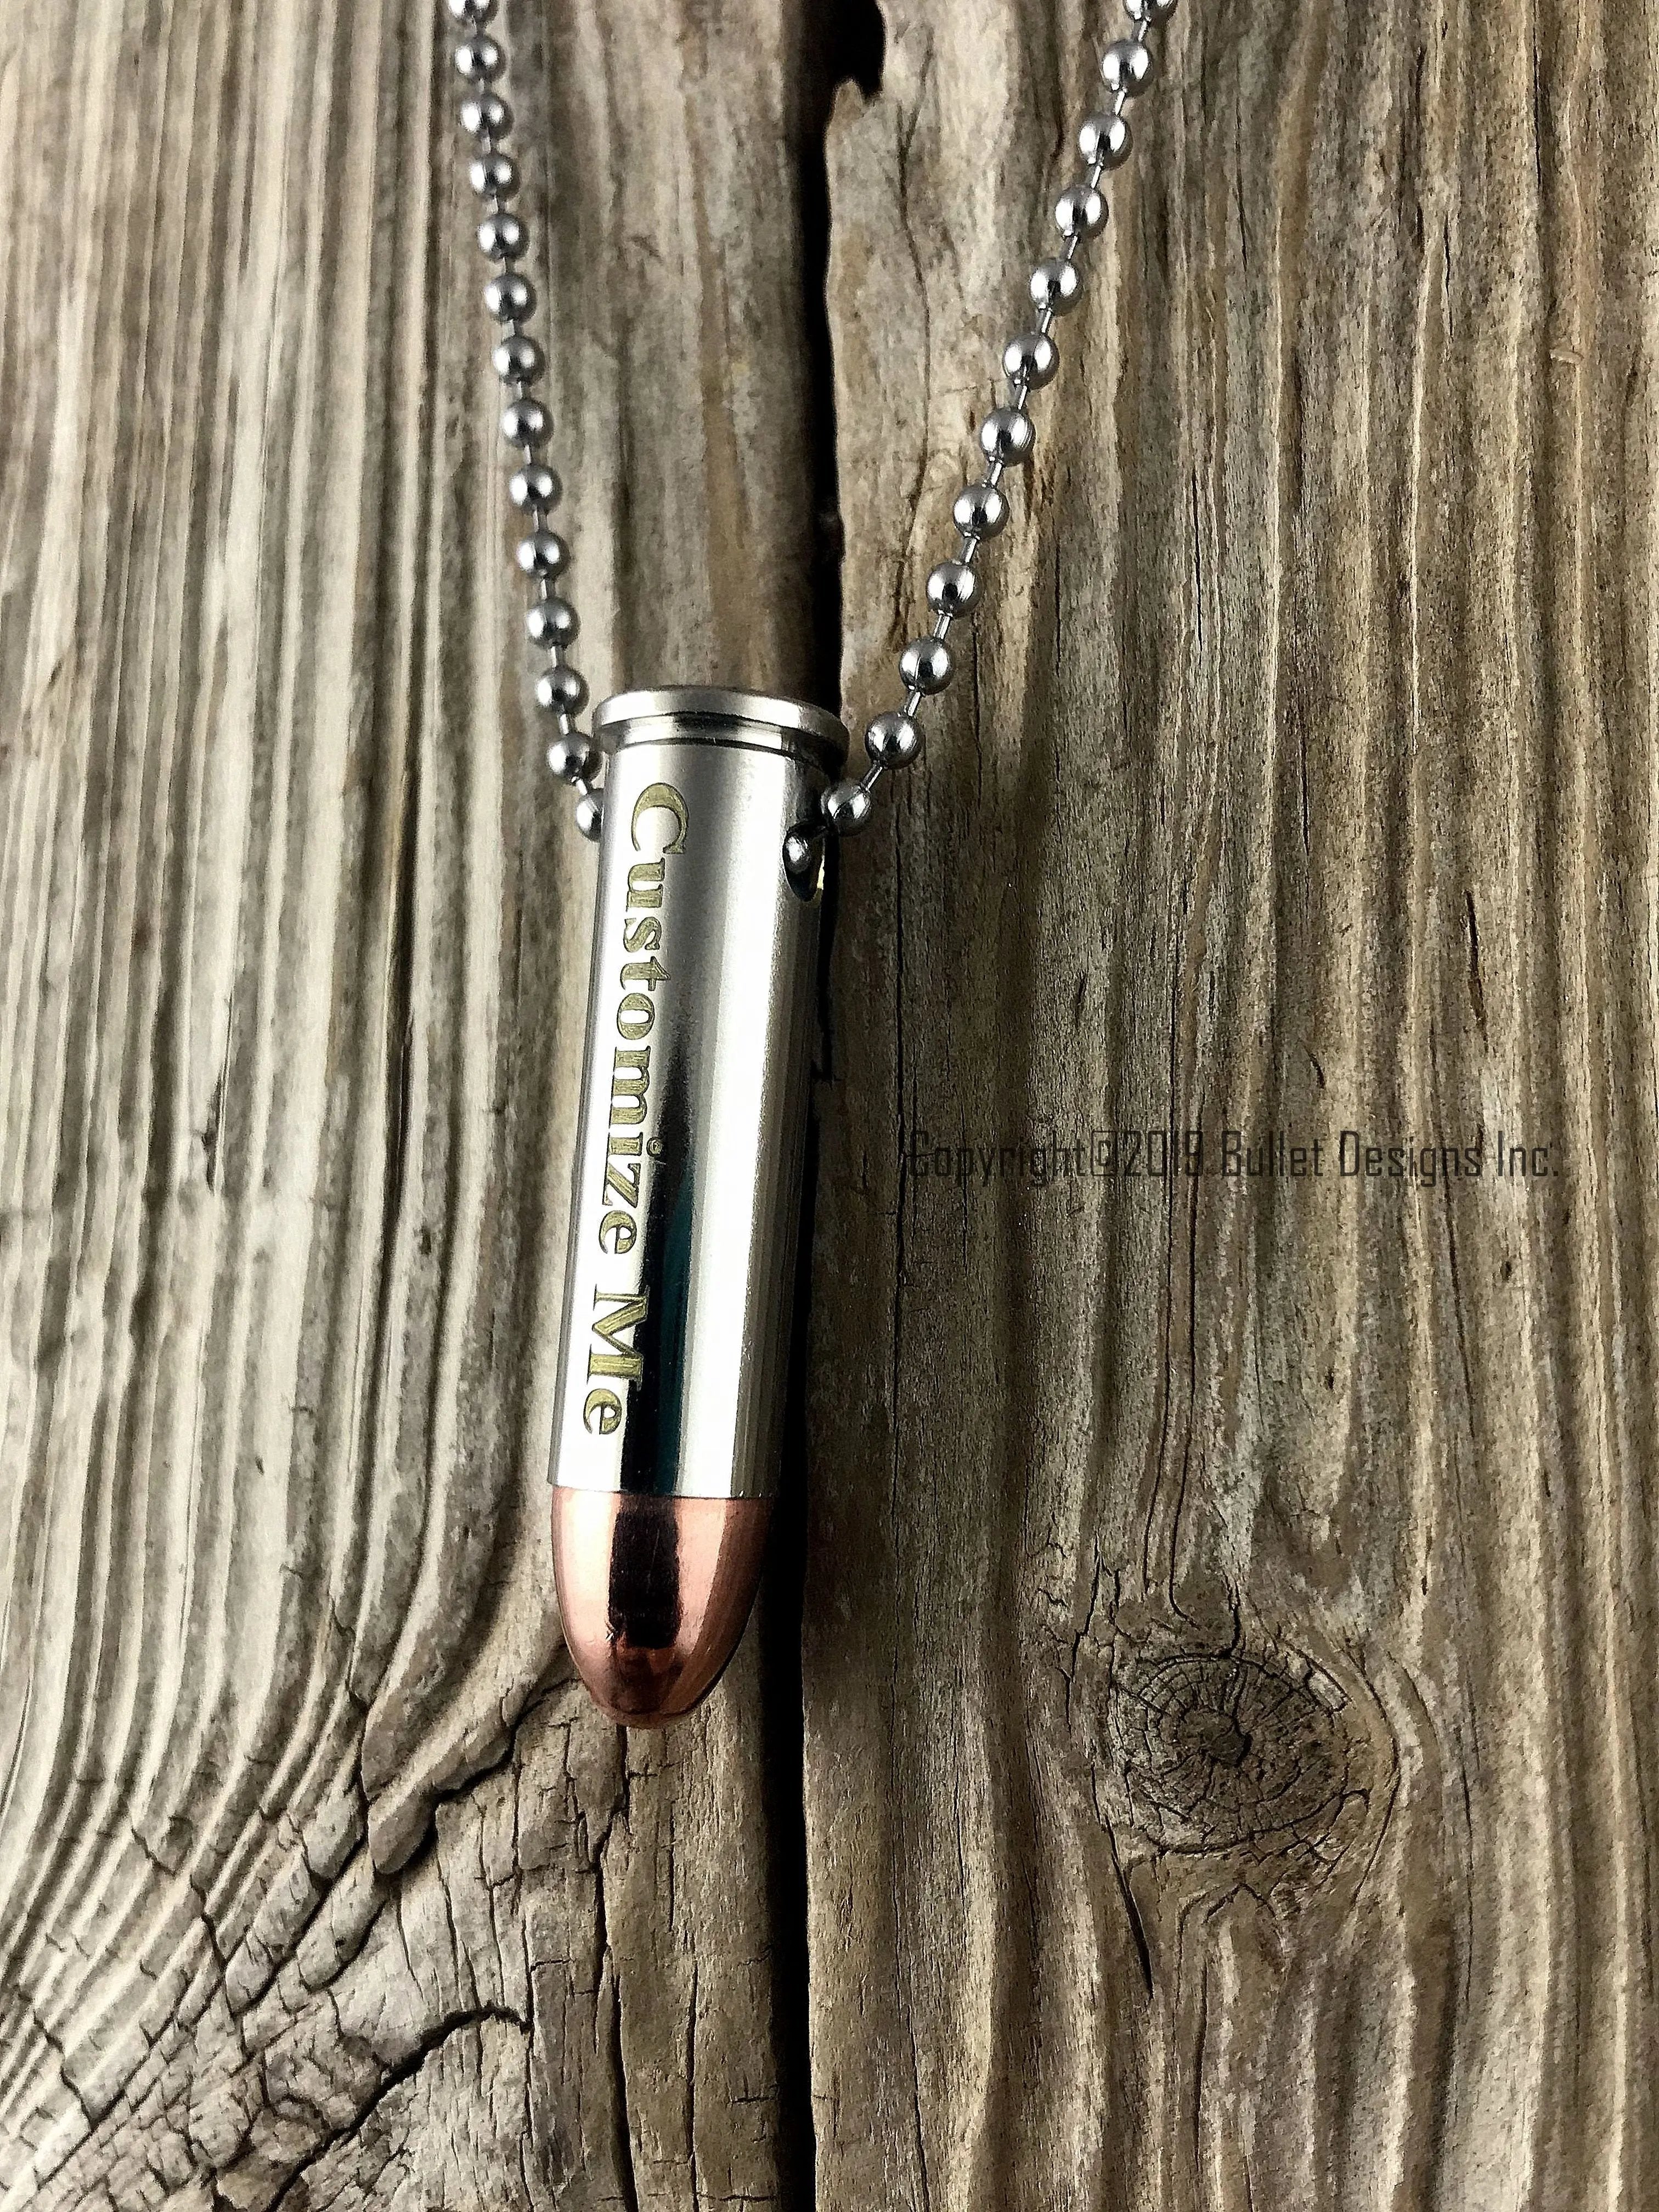 High Caliber Creations – Bullet Jewelry & Engraving